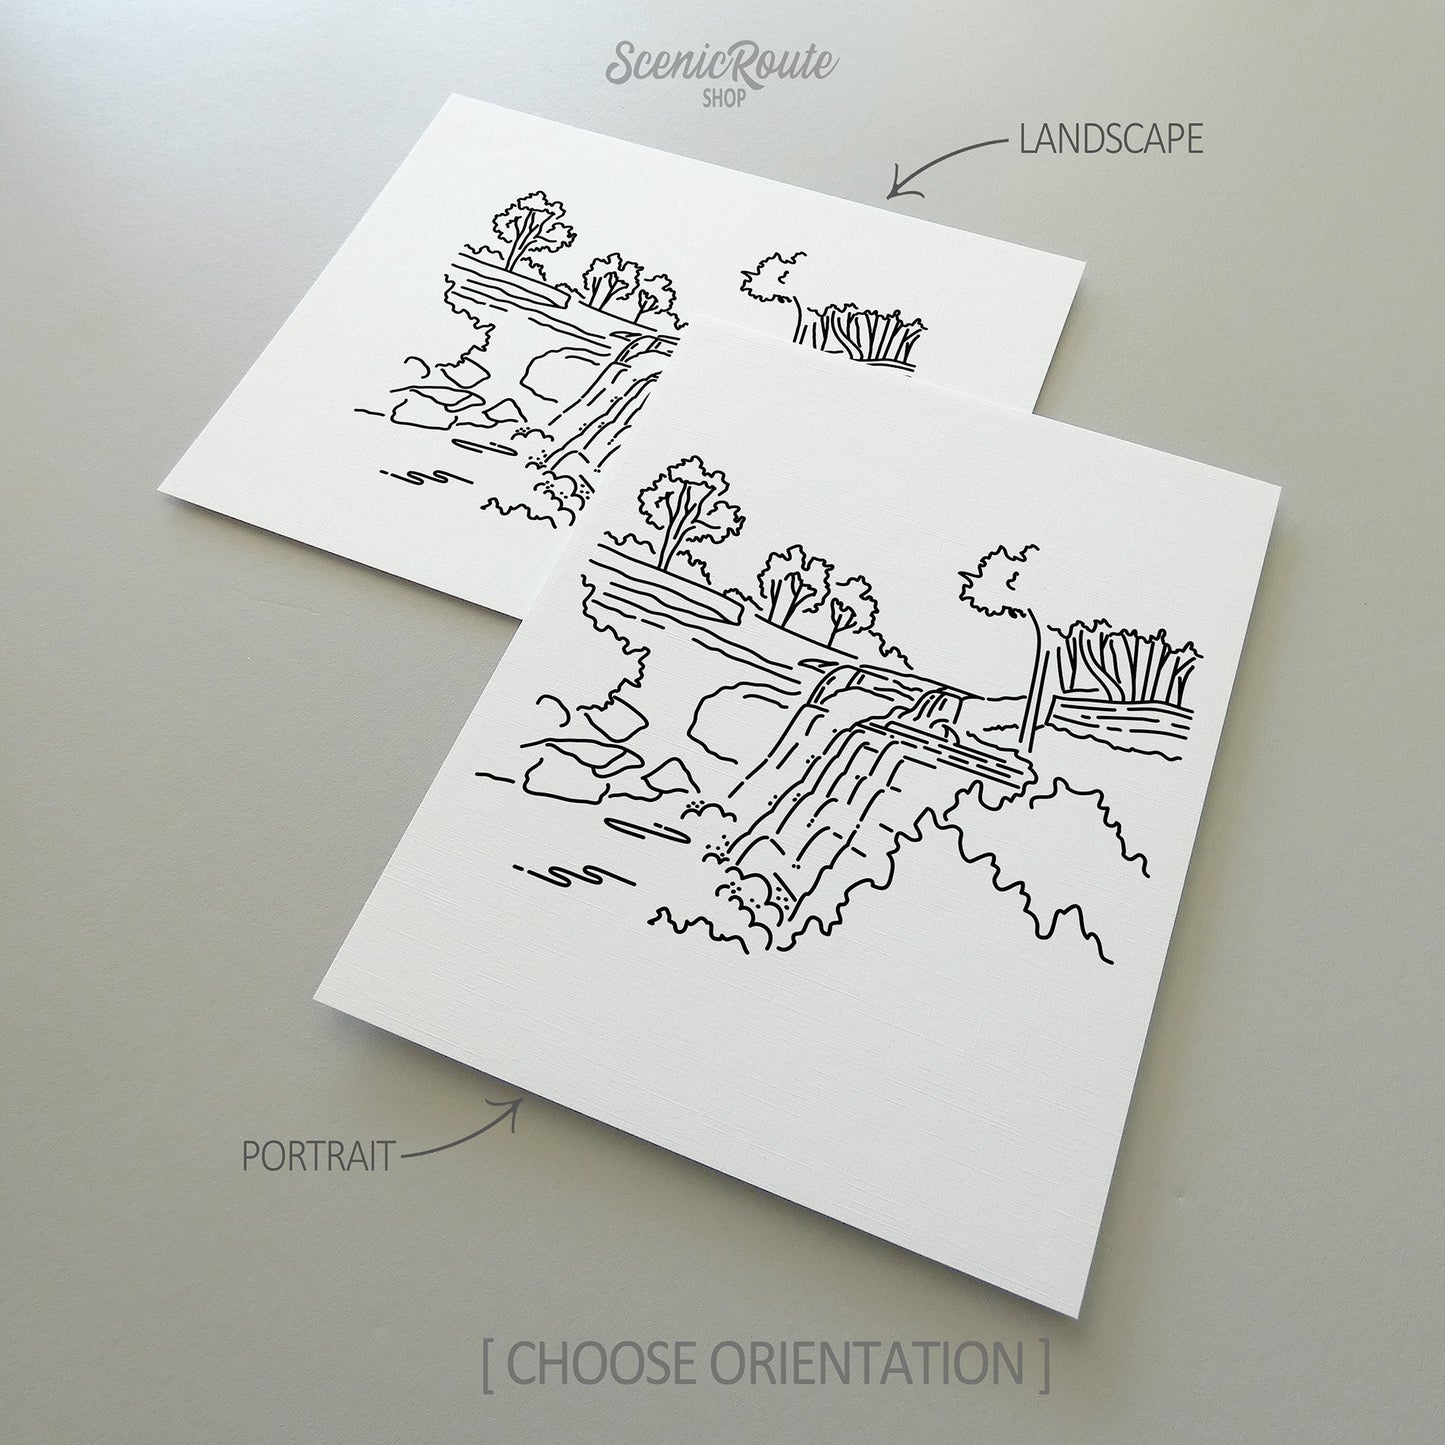 Two line art drawings of Cuyahoga Valley National Park on white linen paper with a gray background.  The pieces are shown in portrait and landscape orientation for the available art print options.